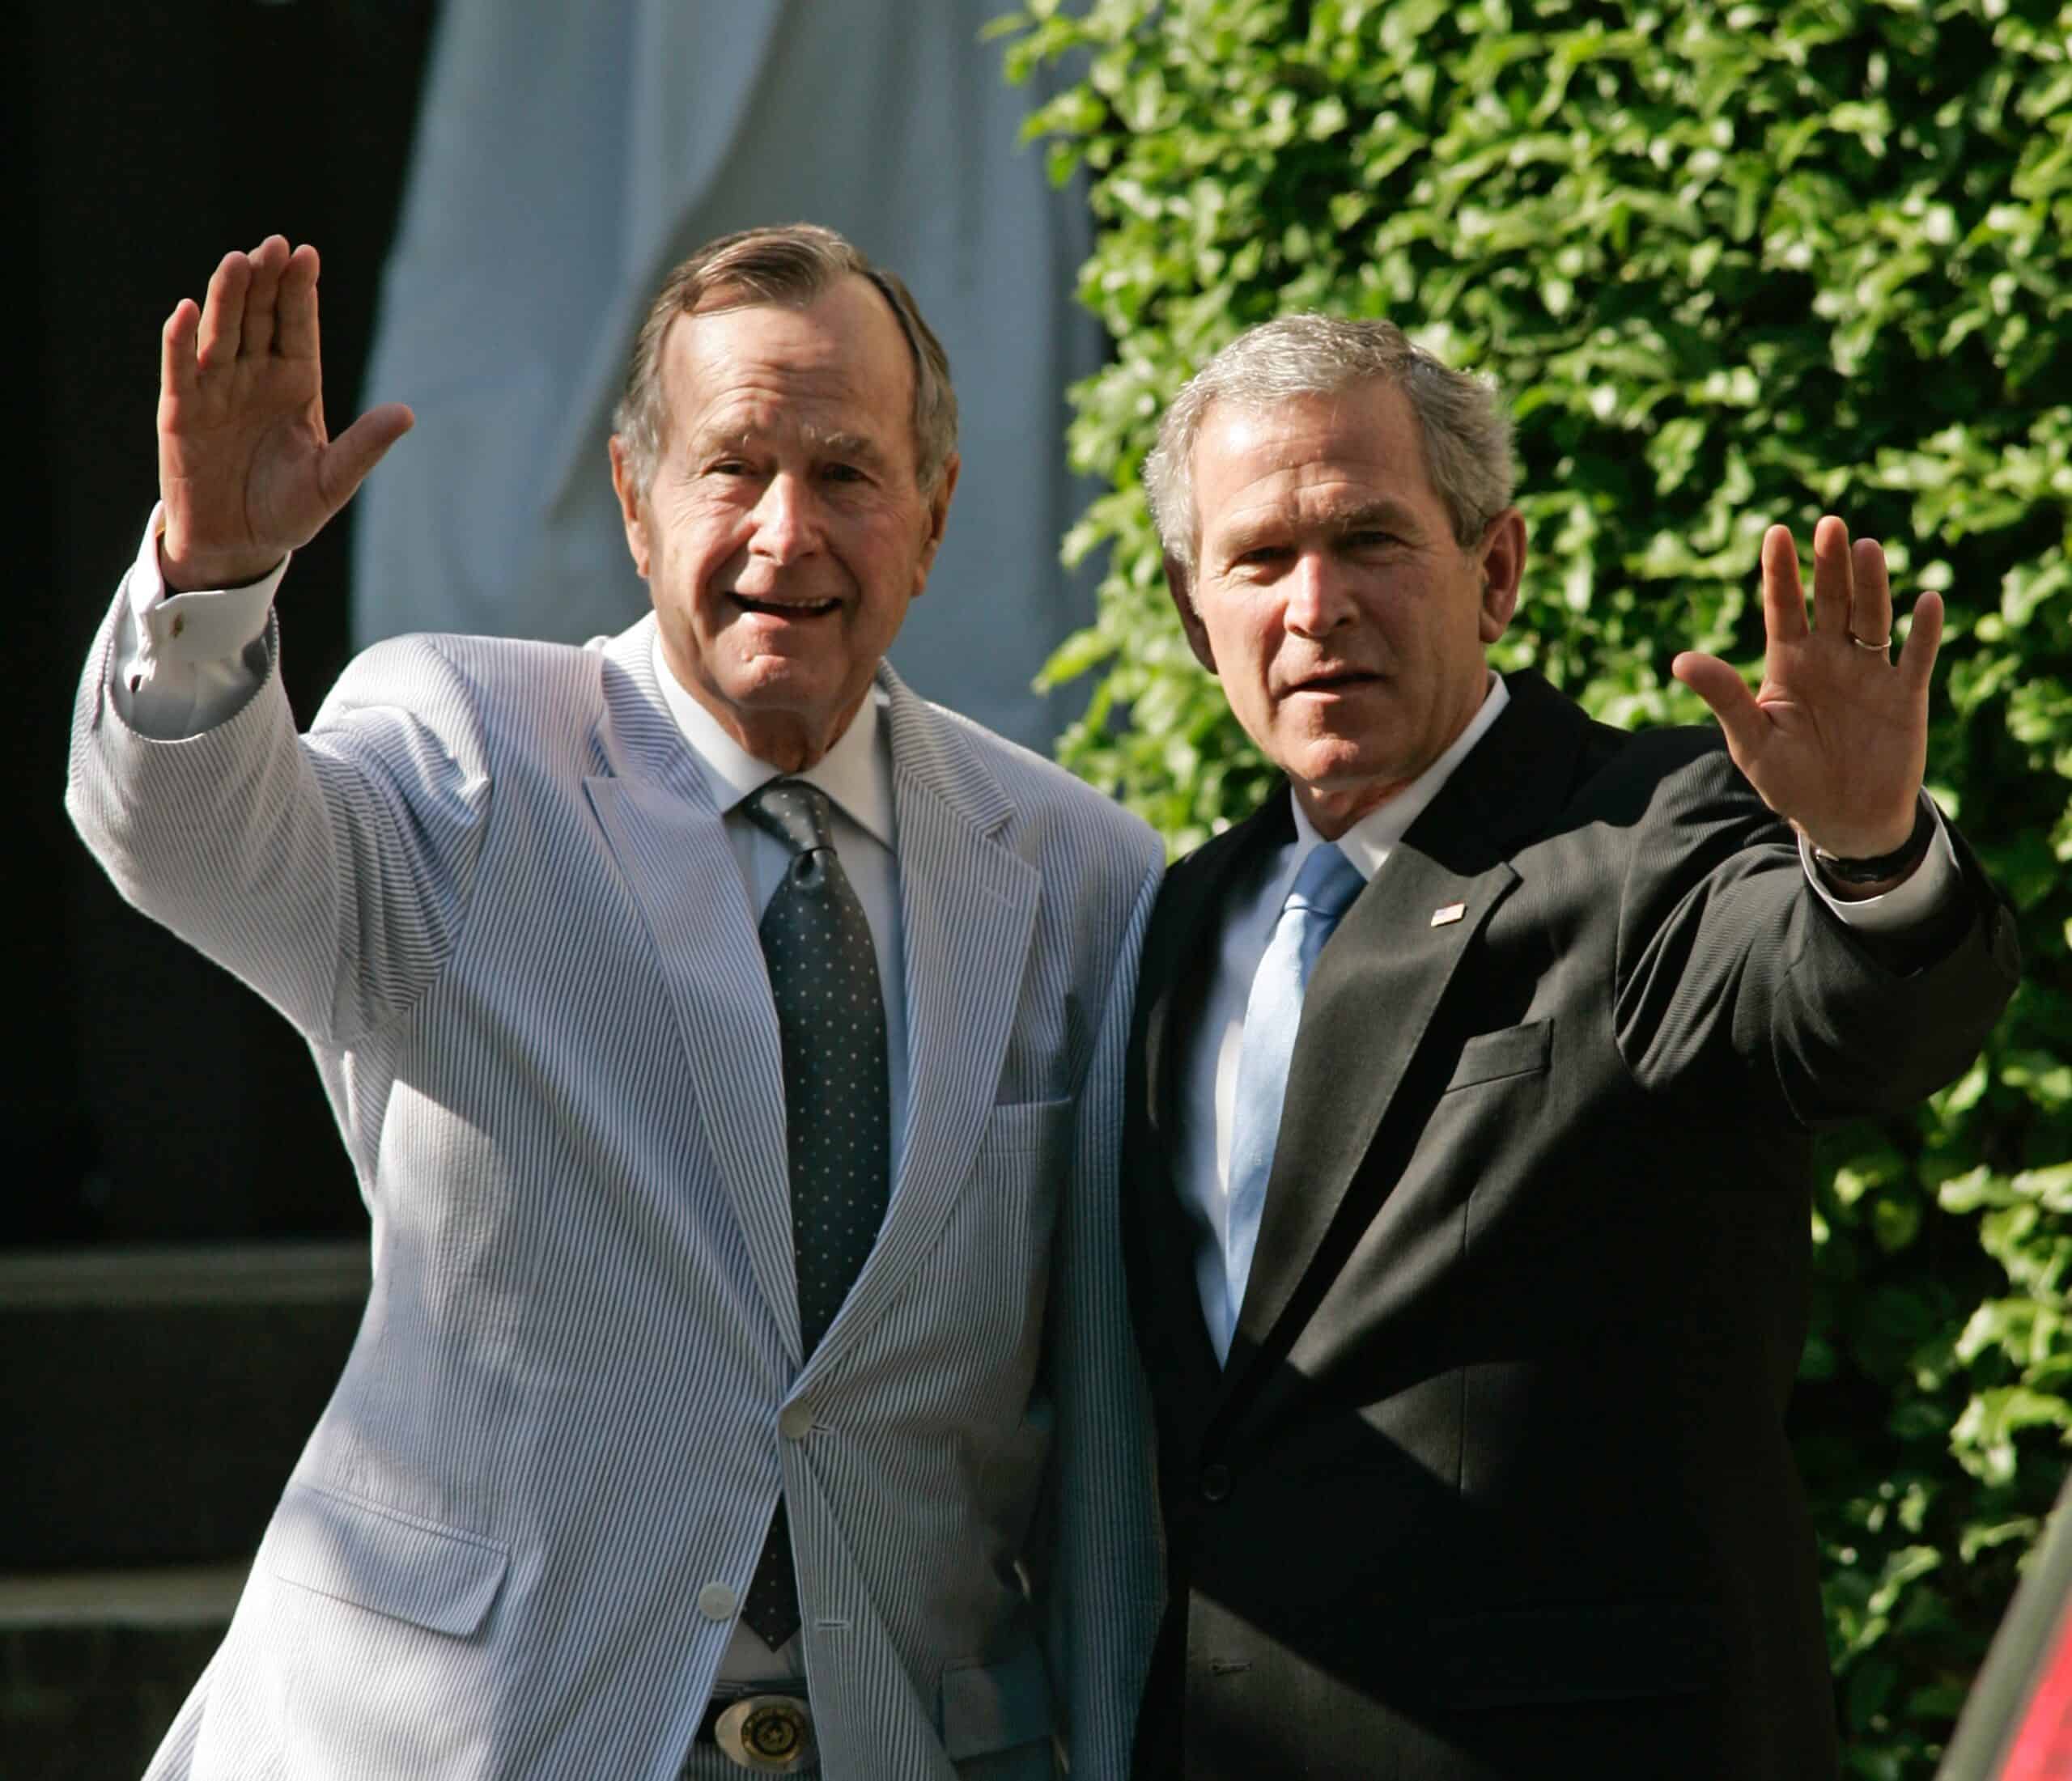 President Bush And Father Attend Family Wedding